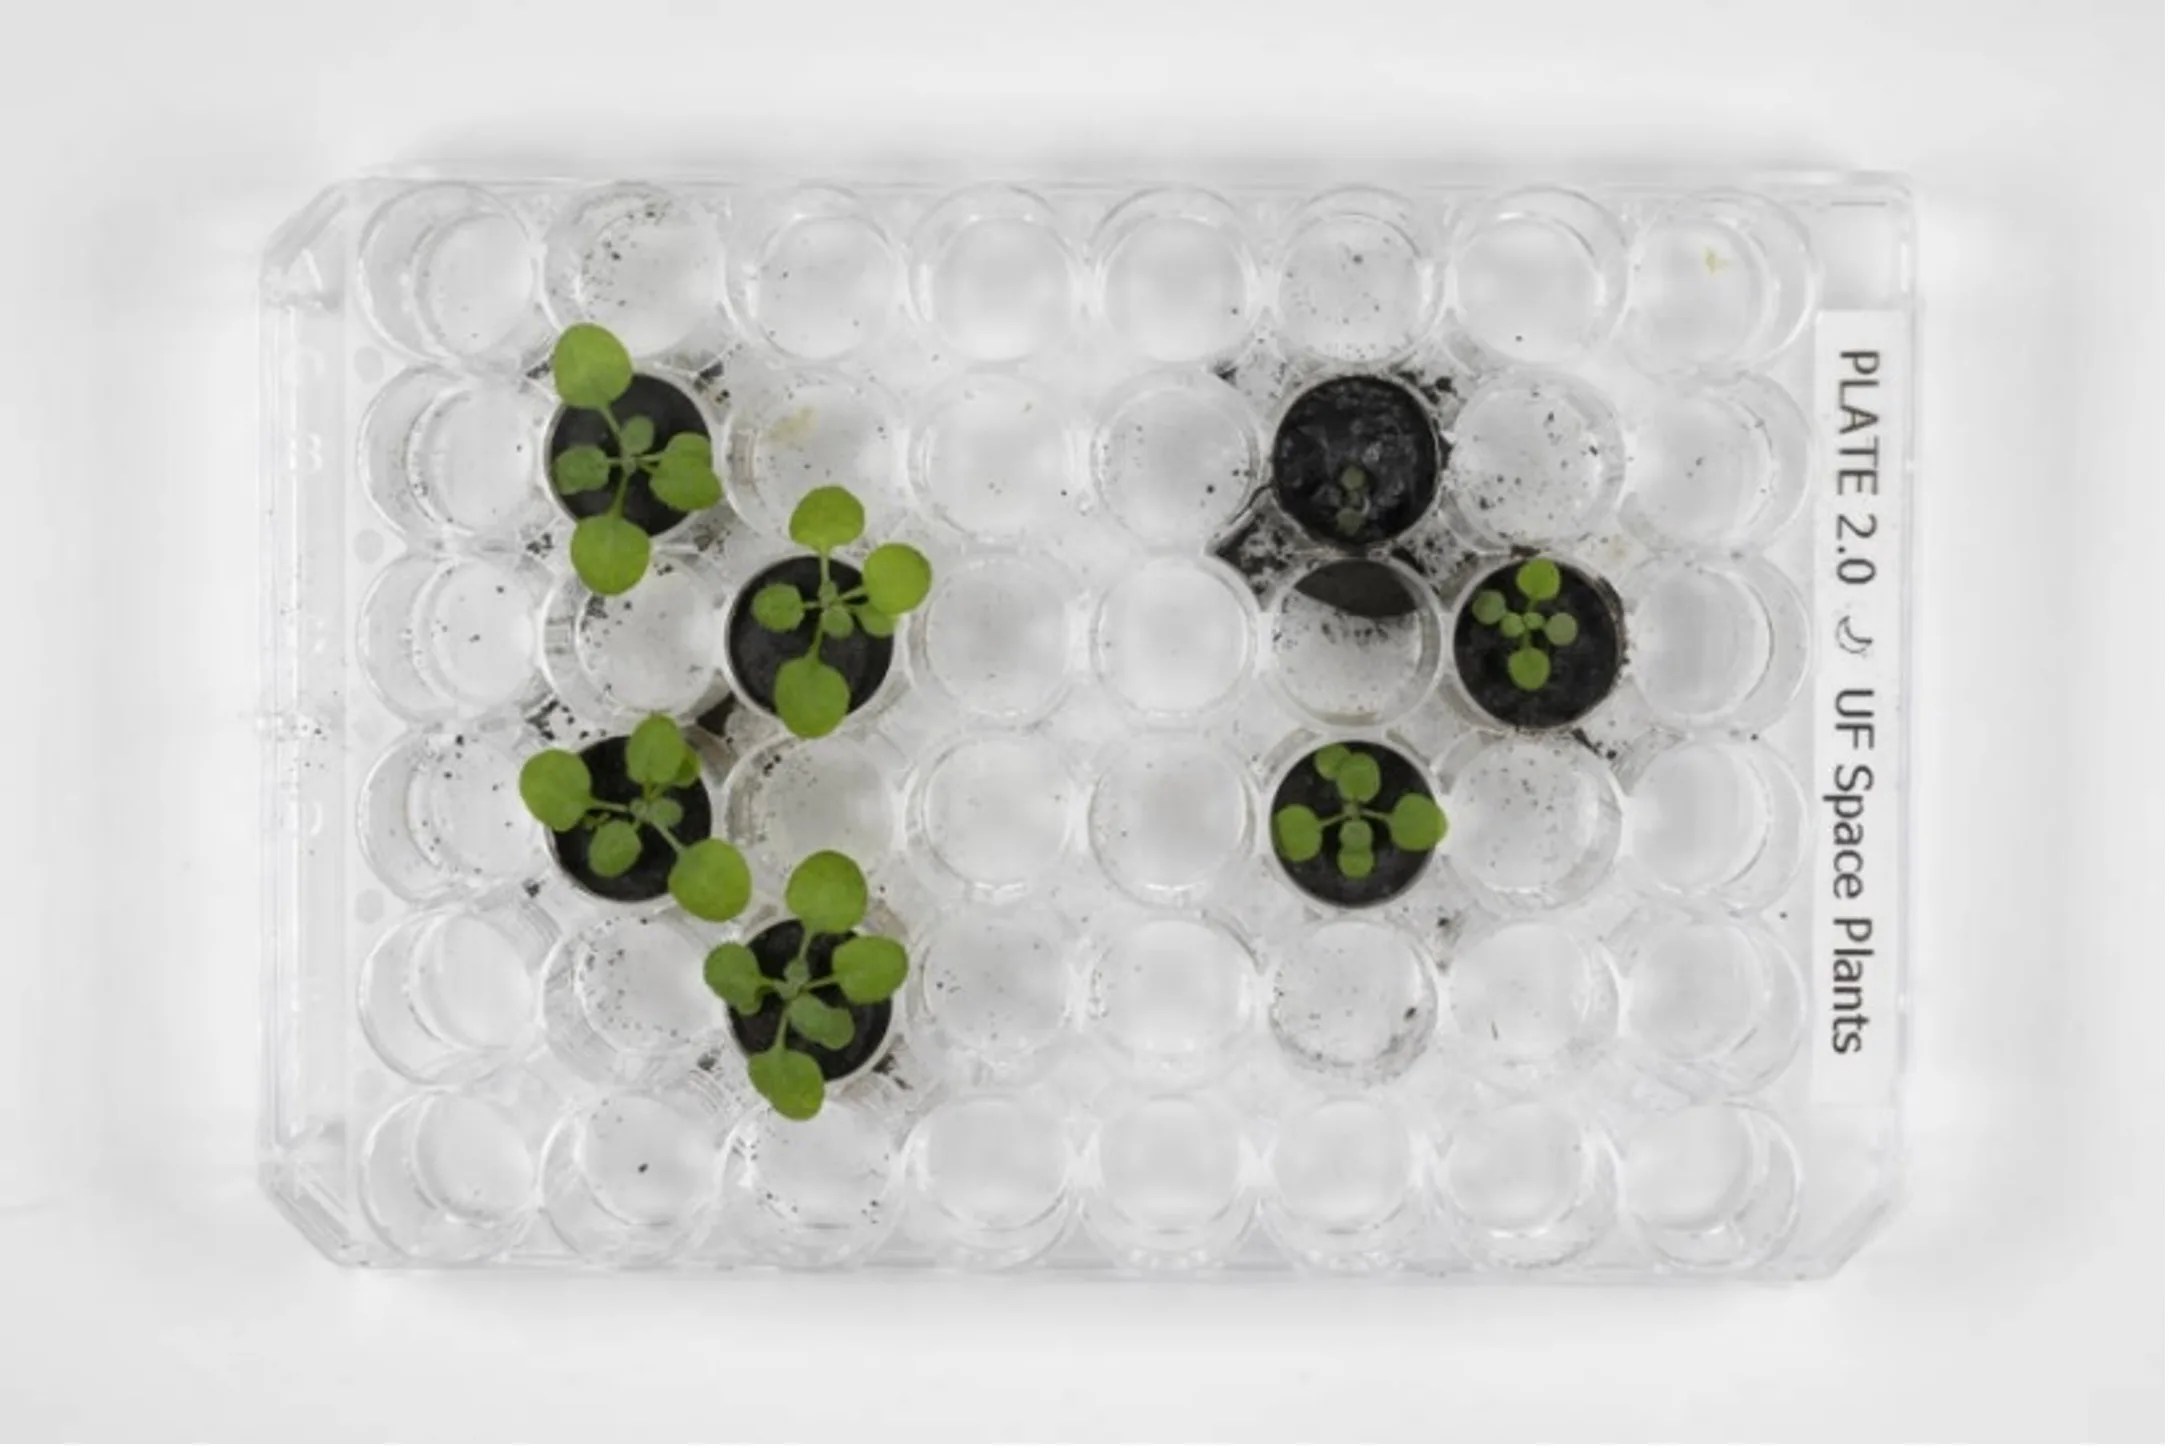 A clear plate has small circular spaces arranged in the shape of an eight by six grid. On the left side, four of the spaces contain tiny samples of volcanic ash simulant, each sprouting a set of green leaves. On the right side, three tiny samples of lunar soil sprout smaller green leaves